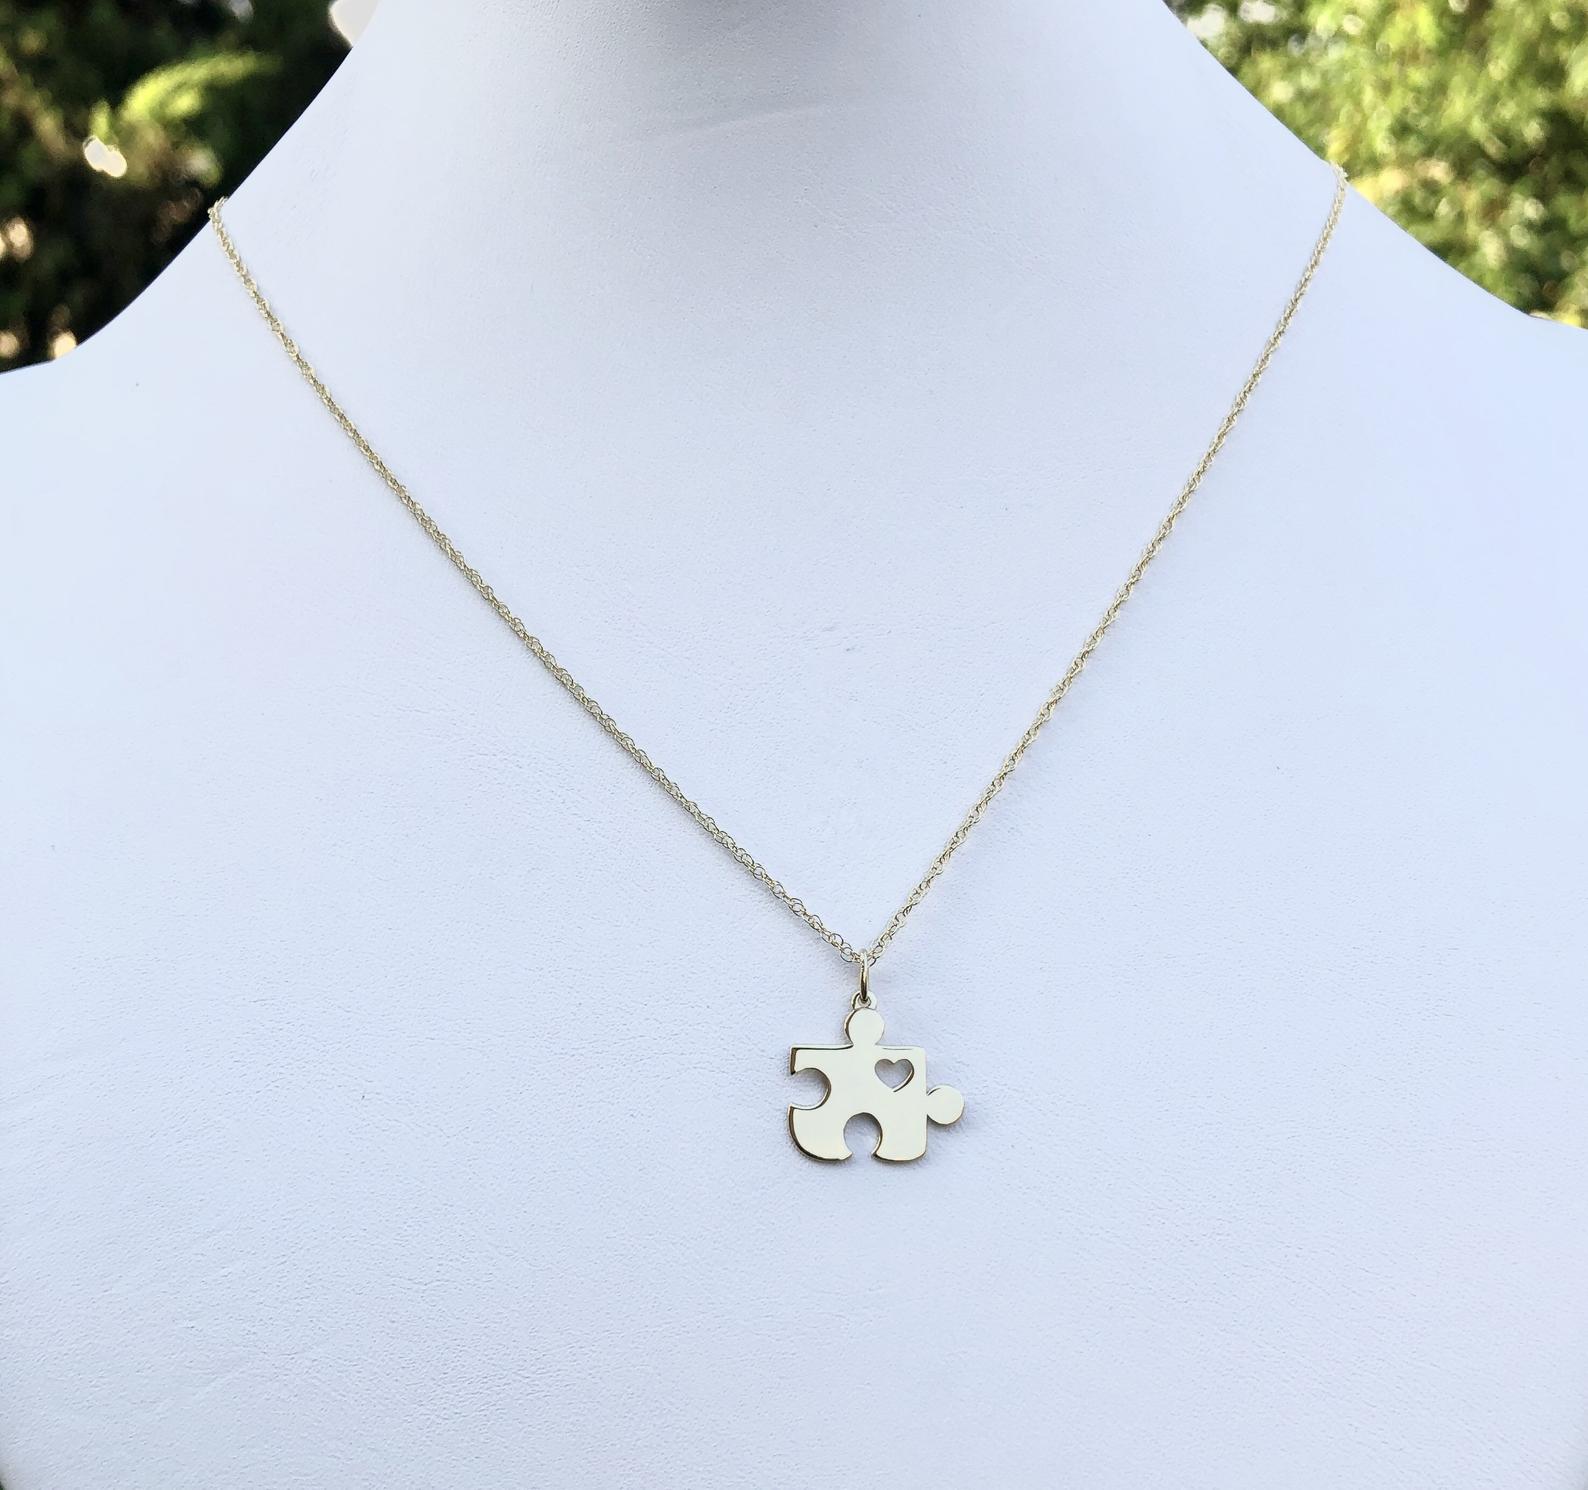 14K Yellow Gold Puzzle Piece Necklace